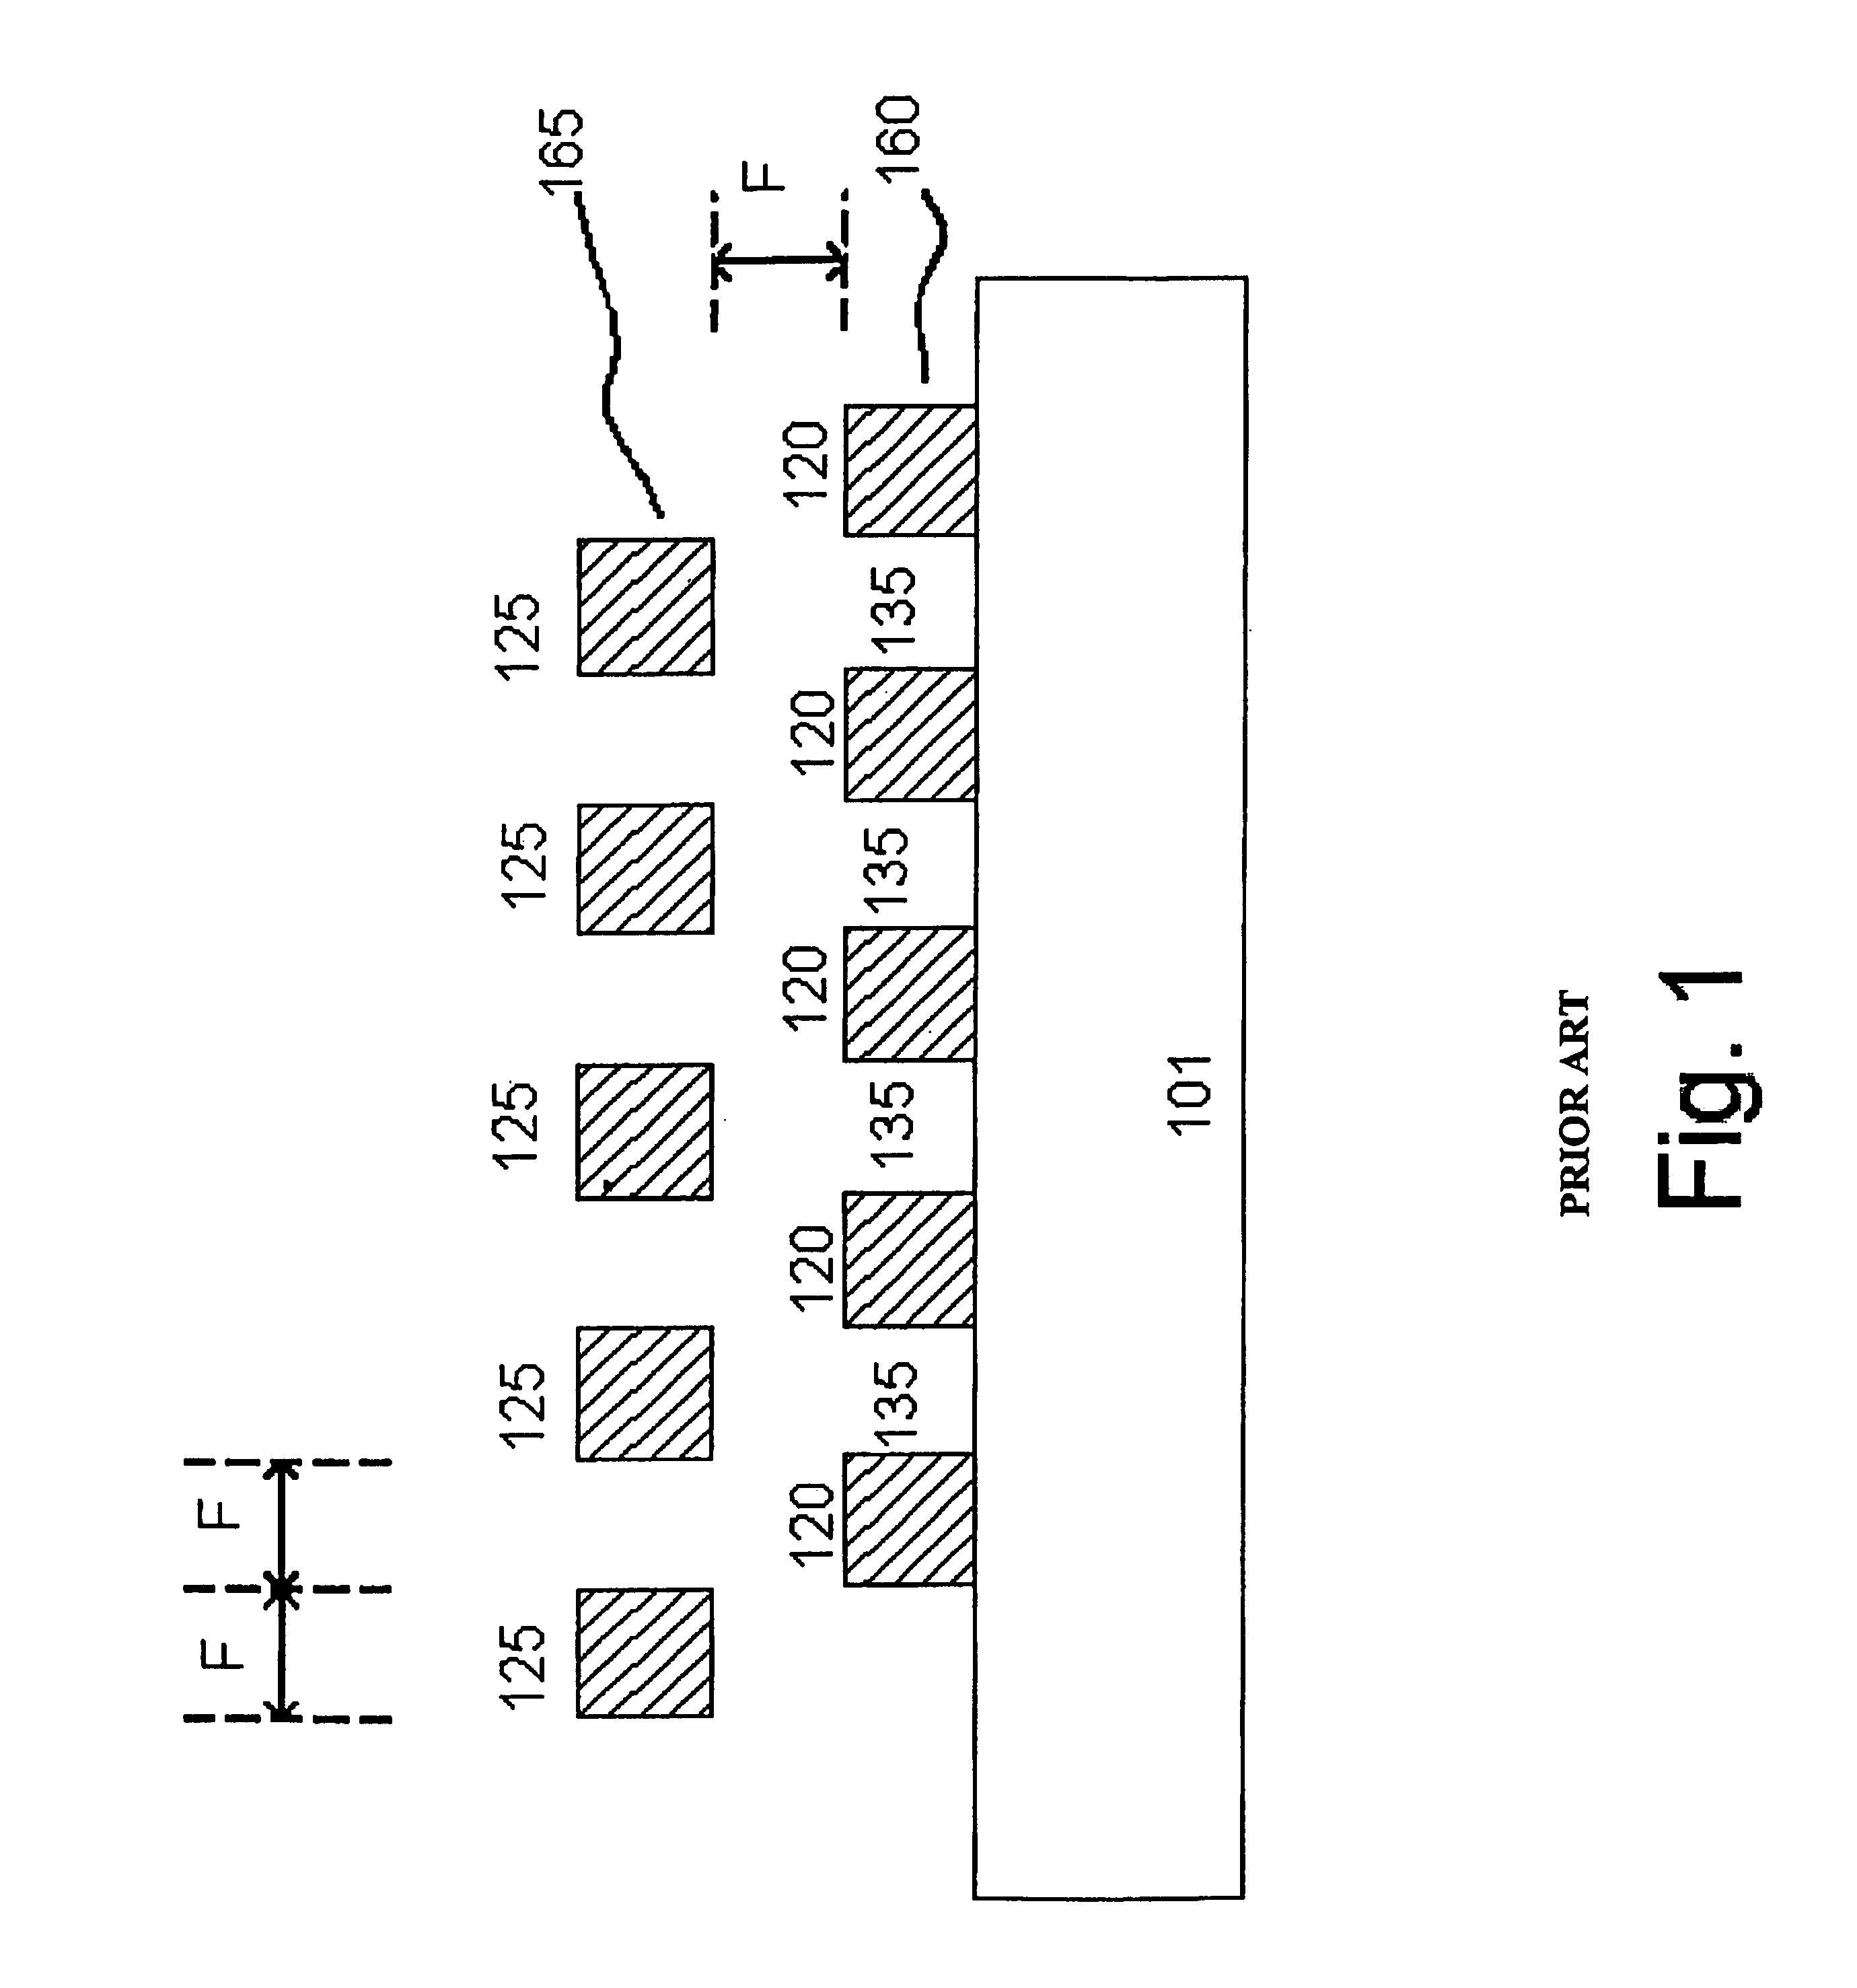 Multi-level conductive lines with reduced pitch